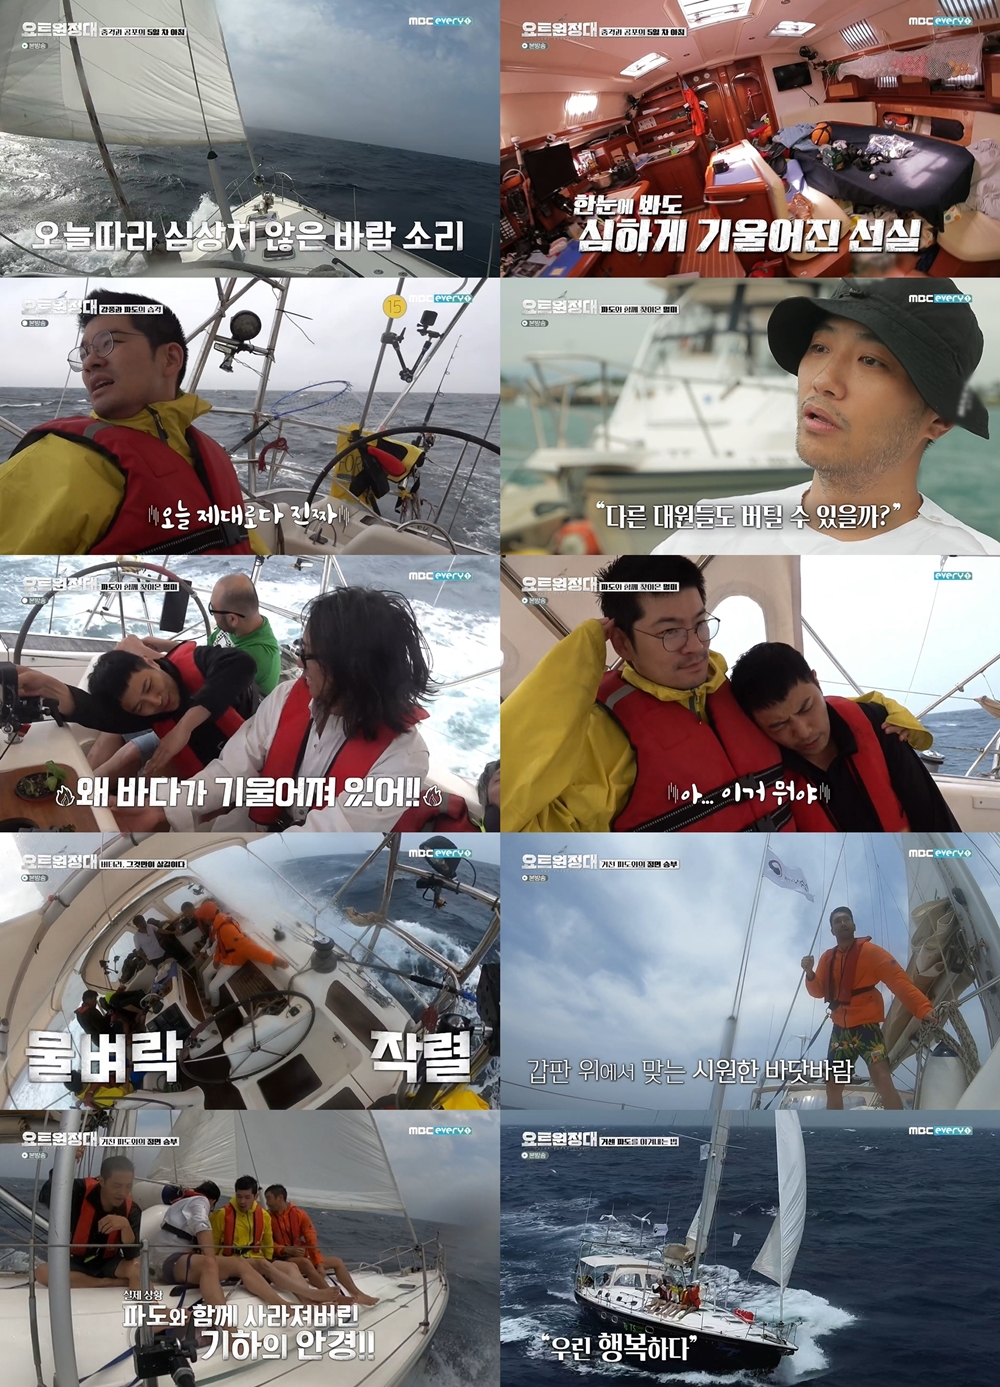 Finally, a rough Sea appeared in front of the yacht expedition.In the 5th MBC Everlon Yot Expedition broadcast on the 14th, Jin Goo, Choi Siwon, Chang Kiha and Song Ho Jun were drawn to meet the 5th day of shock and fear voyage.If the Sea they had met so far had been beautiful and peaceful, the Sea facing the Yacht Expedition was different on this day, engulfing the Yacht Expedition in a rough and threatening manner that transcended imagination.The sailing 4th Yot Expedition crews were nervous about Captain Kim Seung-jins words that strong winds would come from tonight, and finally it was the fifth morning that they were worried about.The yacht shook without hesitation in the house-sized The Waves, and the bed mattress slipped.The crews condition was also the worst in the strong The Waves, which began in the morning, with Chang Kiha not being able to say its real today.When I woke up, The Waves was waving like crazy, and under these circumstances I slept? Did you dream?I thought about this, he said, drawing attention to the appearance of Chang Kiha, who recalled the time.Even Jin Goo, who showed his usual passion for the man, showed a hard time getting seasick on this day.Jin Goo was seen struggling to beat seasickness, shouting Please live and Why did you bring me? for Sea.Jin Goo, who envied Chang Kiha, who does not get sick, called it the miracle, eventually rested on Chang Kihas shoulder and took a break.All they could do was wait in front of the power of the dreadful nature, and all of them were exhausted by seasickness, and Choi Siwon was encouraged.Lets try to win, he says, and head spleenly over the deck: Enjoy this situation if you cant avoid The Waves, a conclusion by Choi Siwon.Along the youngest Choi Siwon, Jin Goo, Chang Kiha and Song Ho-joon also headed on deck, and the Yot Expedition crew cheered and enjoyed the open sea.Choi Siwon said, How many times will you experience this experience in your life while living? And made you guess that you realized a lot through it.The crew sat side by side on deck and weathered the rough Sea together.In the meantime, a large The Waves hit them, and Chang Kihas glasses were swept away by The Waves.Chang Kiha thanked the members who tried to find his glasses without giving up in a confused situation, and their sticky teamwork caused a warm smile.The appearance of the Yot Expedition crew, who enjoyed the charm of the real Sea, offered the charm of adventures not seen in any of the entertainments; Jin Goo said, Four meters high (?)I am sick of meeting The Waves of the degree , Song Ho-joon is playing with The Waves, Chang Kiha said, I have glasses flying to The Waves, Choi Siwon said, I have died on the 5th day of the voyage, I am going to die again. Finally, I am happy.